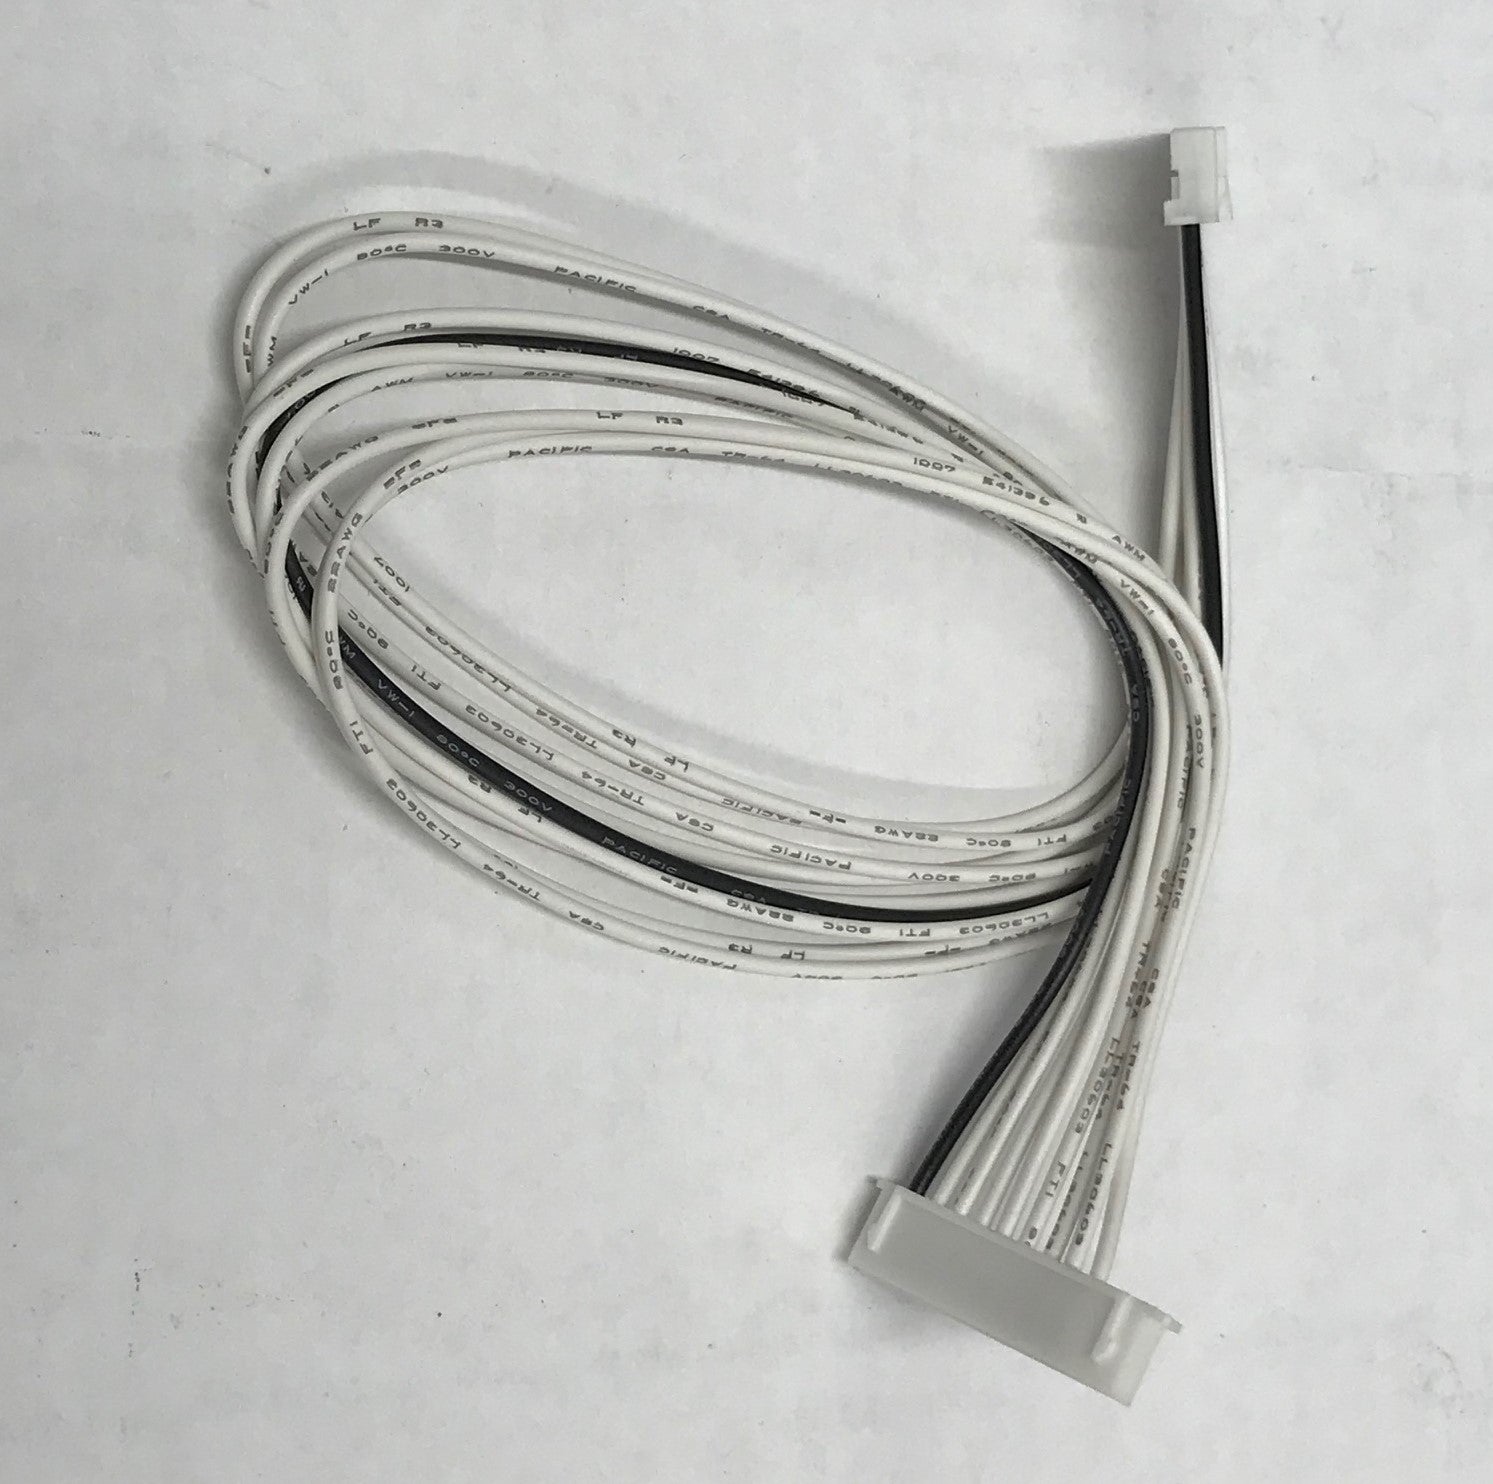 Revolectrix Cable for use with GT1000 and GT1000 Duo chargers and MPA or SPA boards OPRMPA-FRC-X06